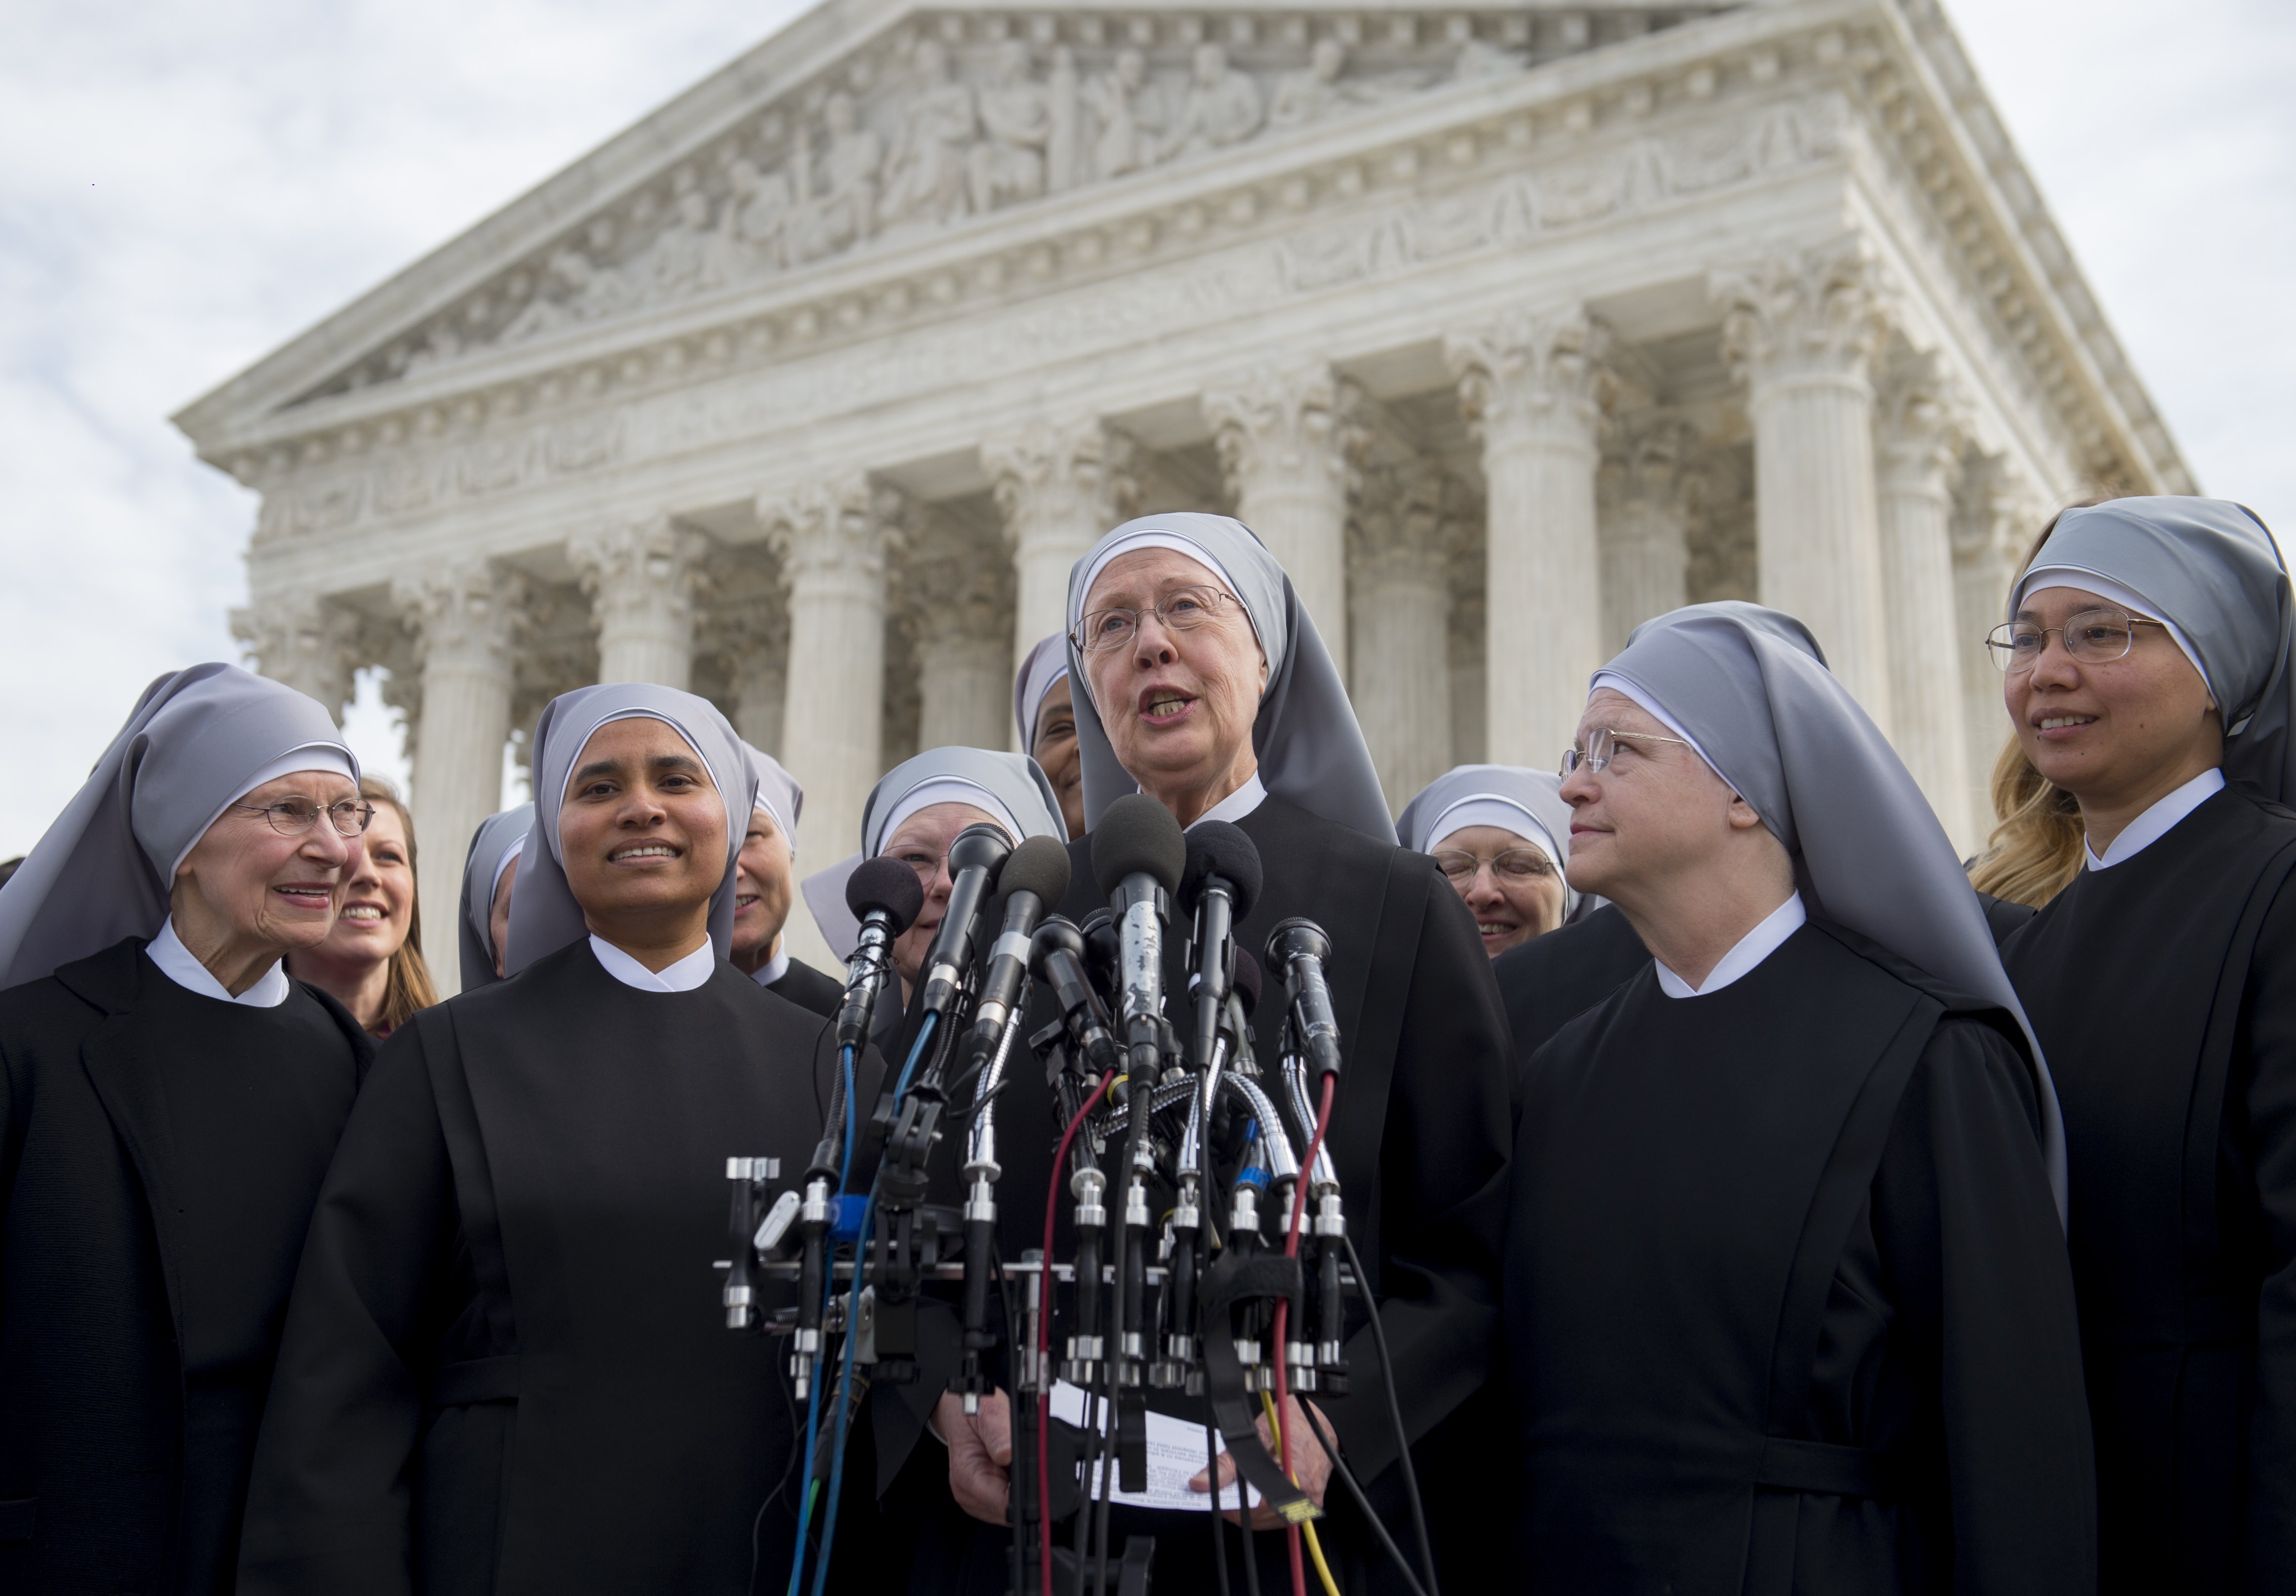 The Little Sisters of the Poor should demand to have their beliefs taken seriously.